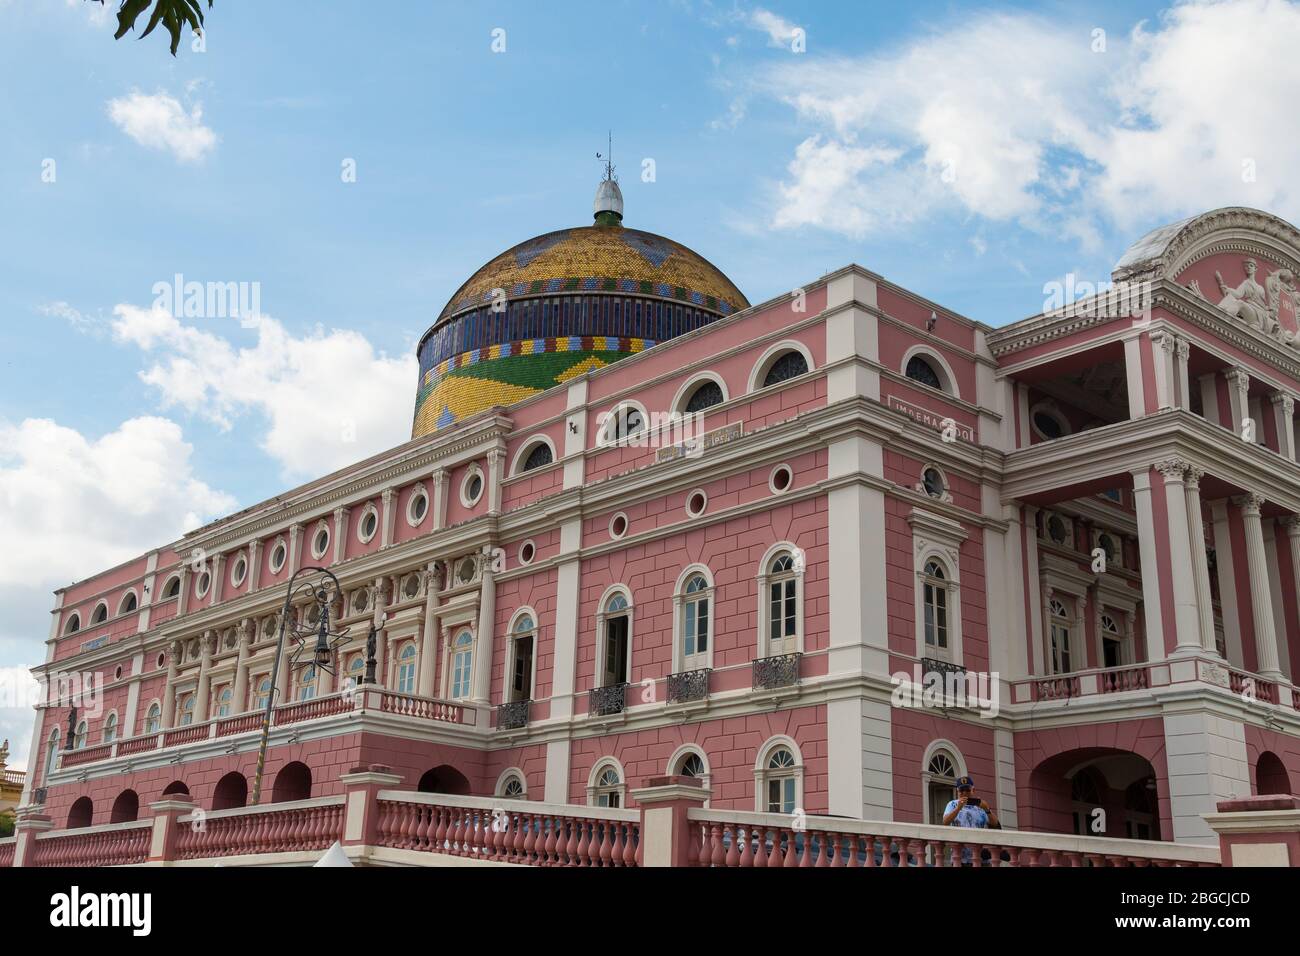 Amazon Theatre (Teatro Amazonas), an opera house completed in 1896 and located in Manaus, the capital of the Brazilian state of Amazonas. Stock Photo